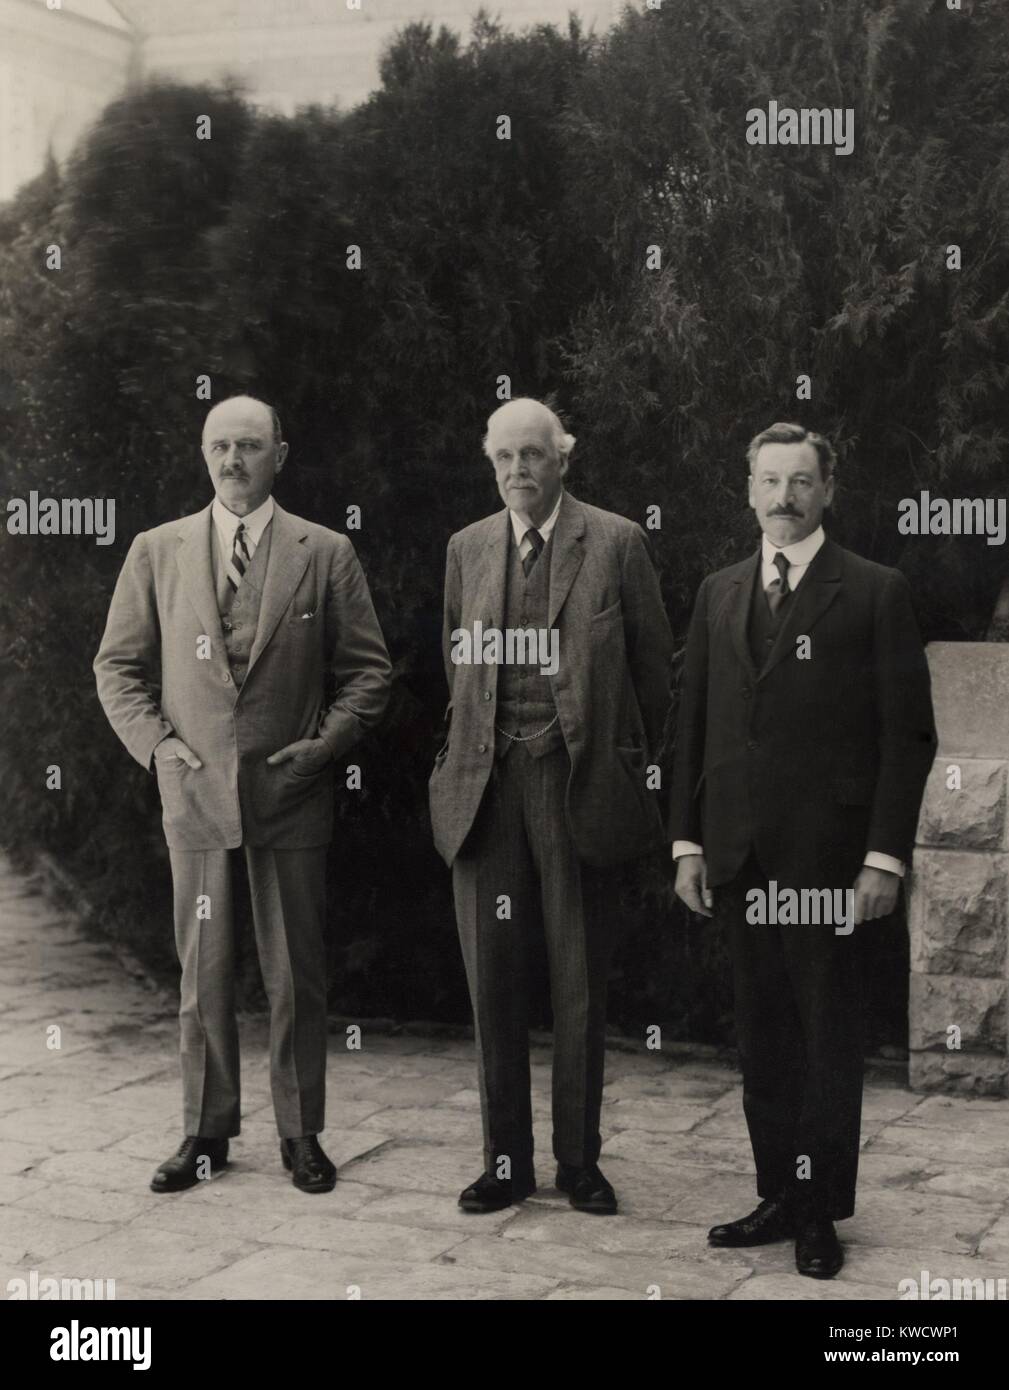 British men of power in British Mandatory Palestine, March 31, 1925. L-R: Field Marshall Lord Allenby; Lord Arthur Balfour; Sir Herbert Samuel, High Commissioner (BSLOC 2017 1 183) Stock Photo